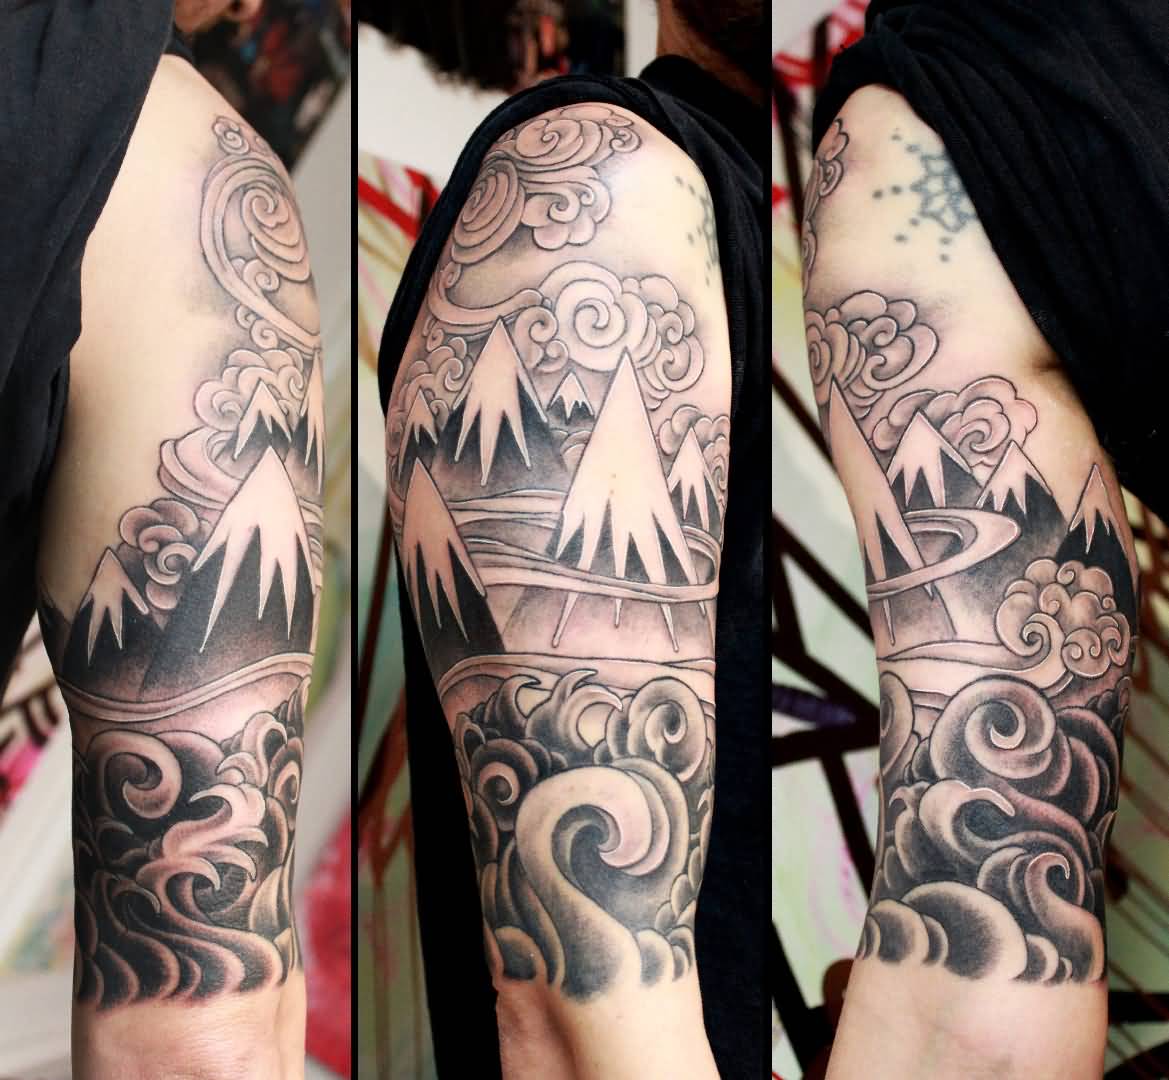 Stylized Mountains With Clouds Tattoo On Half Sleeve